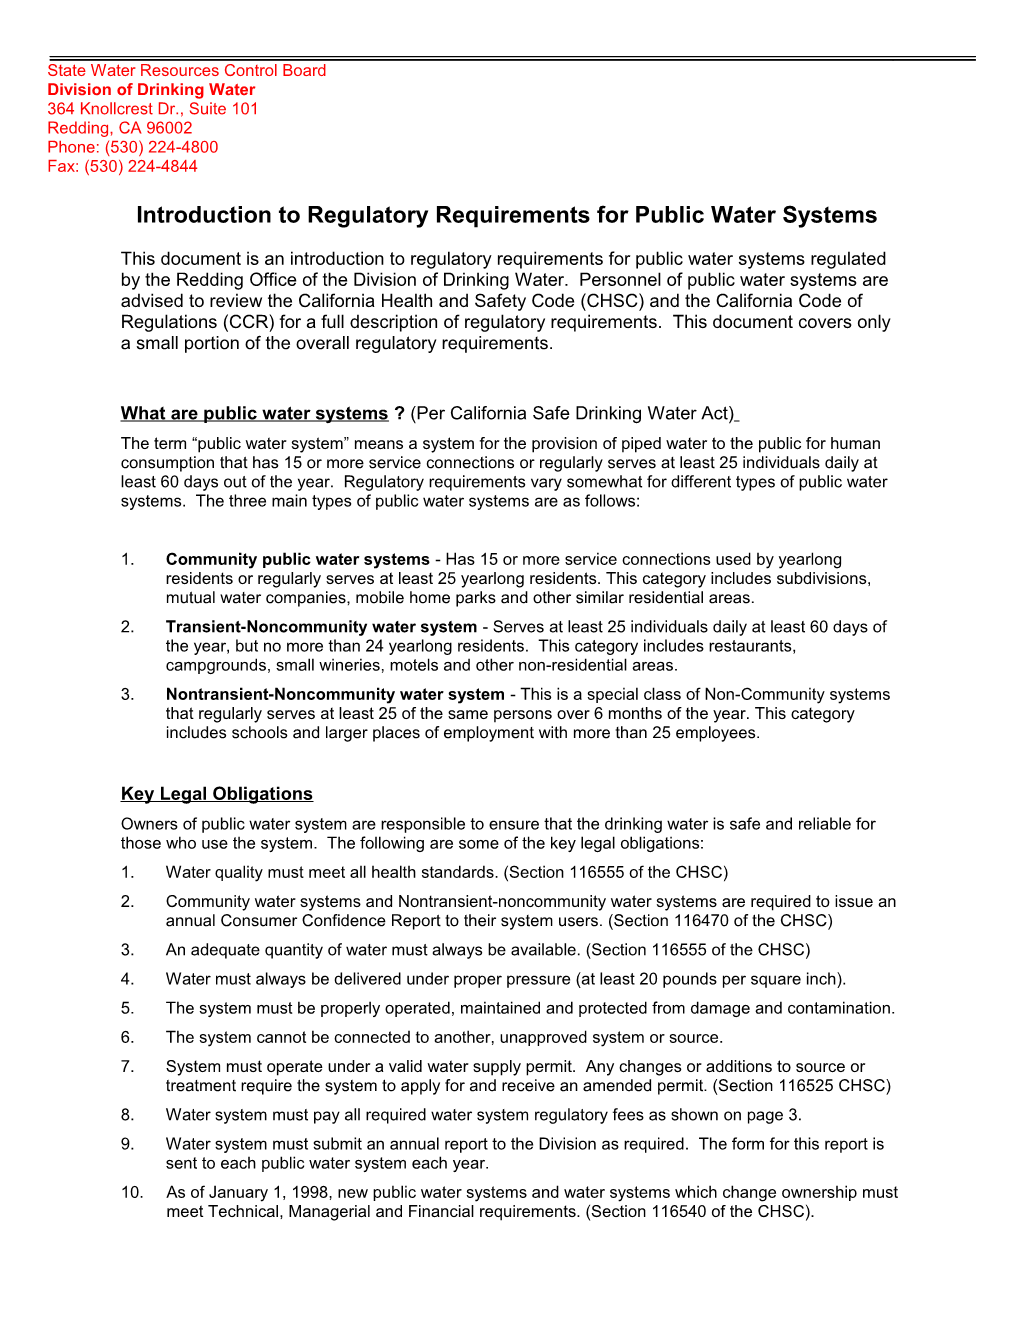 Public Water System Regulatory Requirements